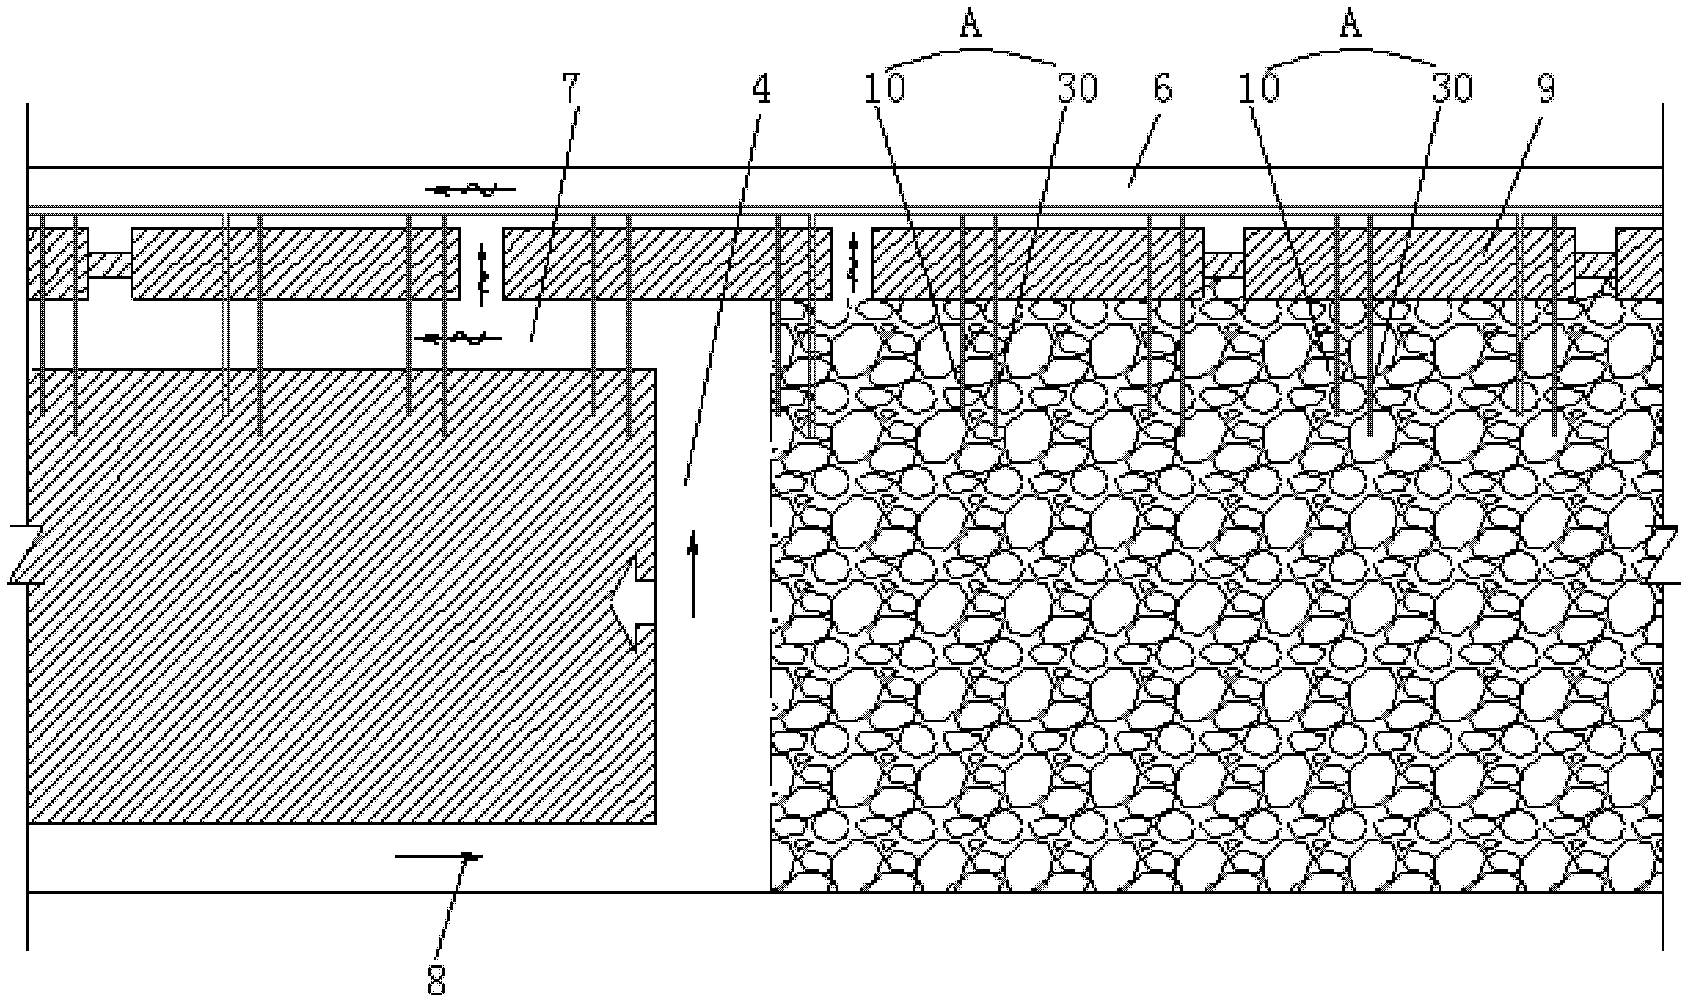 Gas extraction well location method based on overlying rock fracture shell